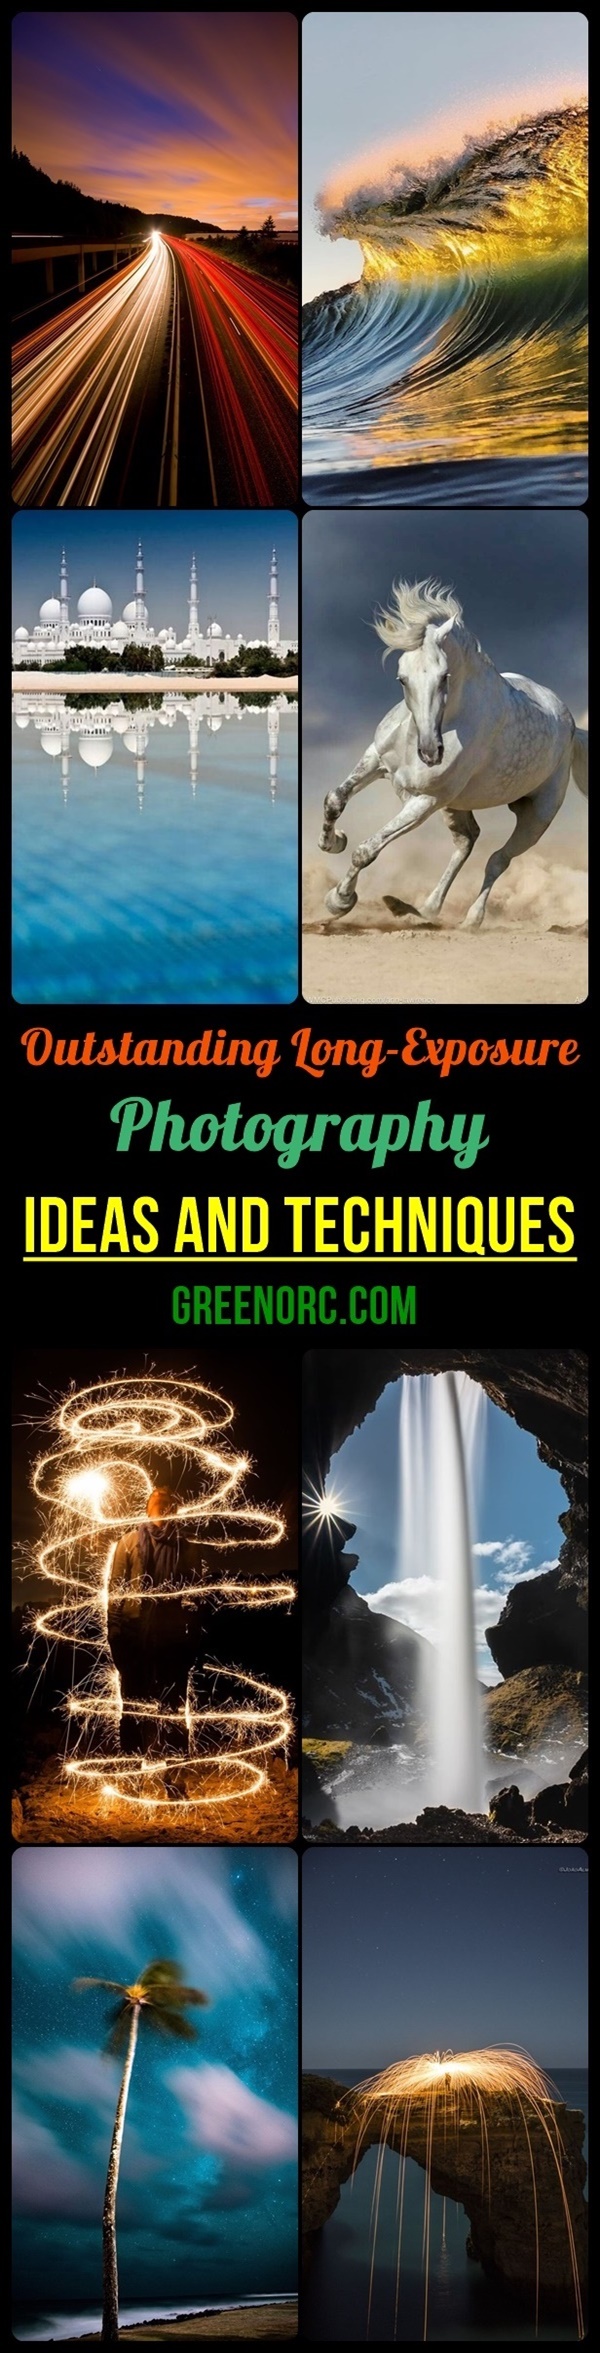 Outstanding Long-Exposure Photography Ideas and Techniques